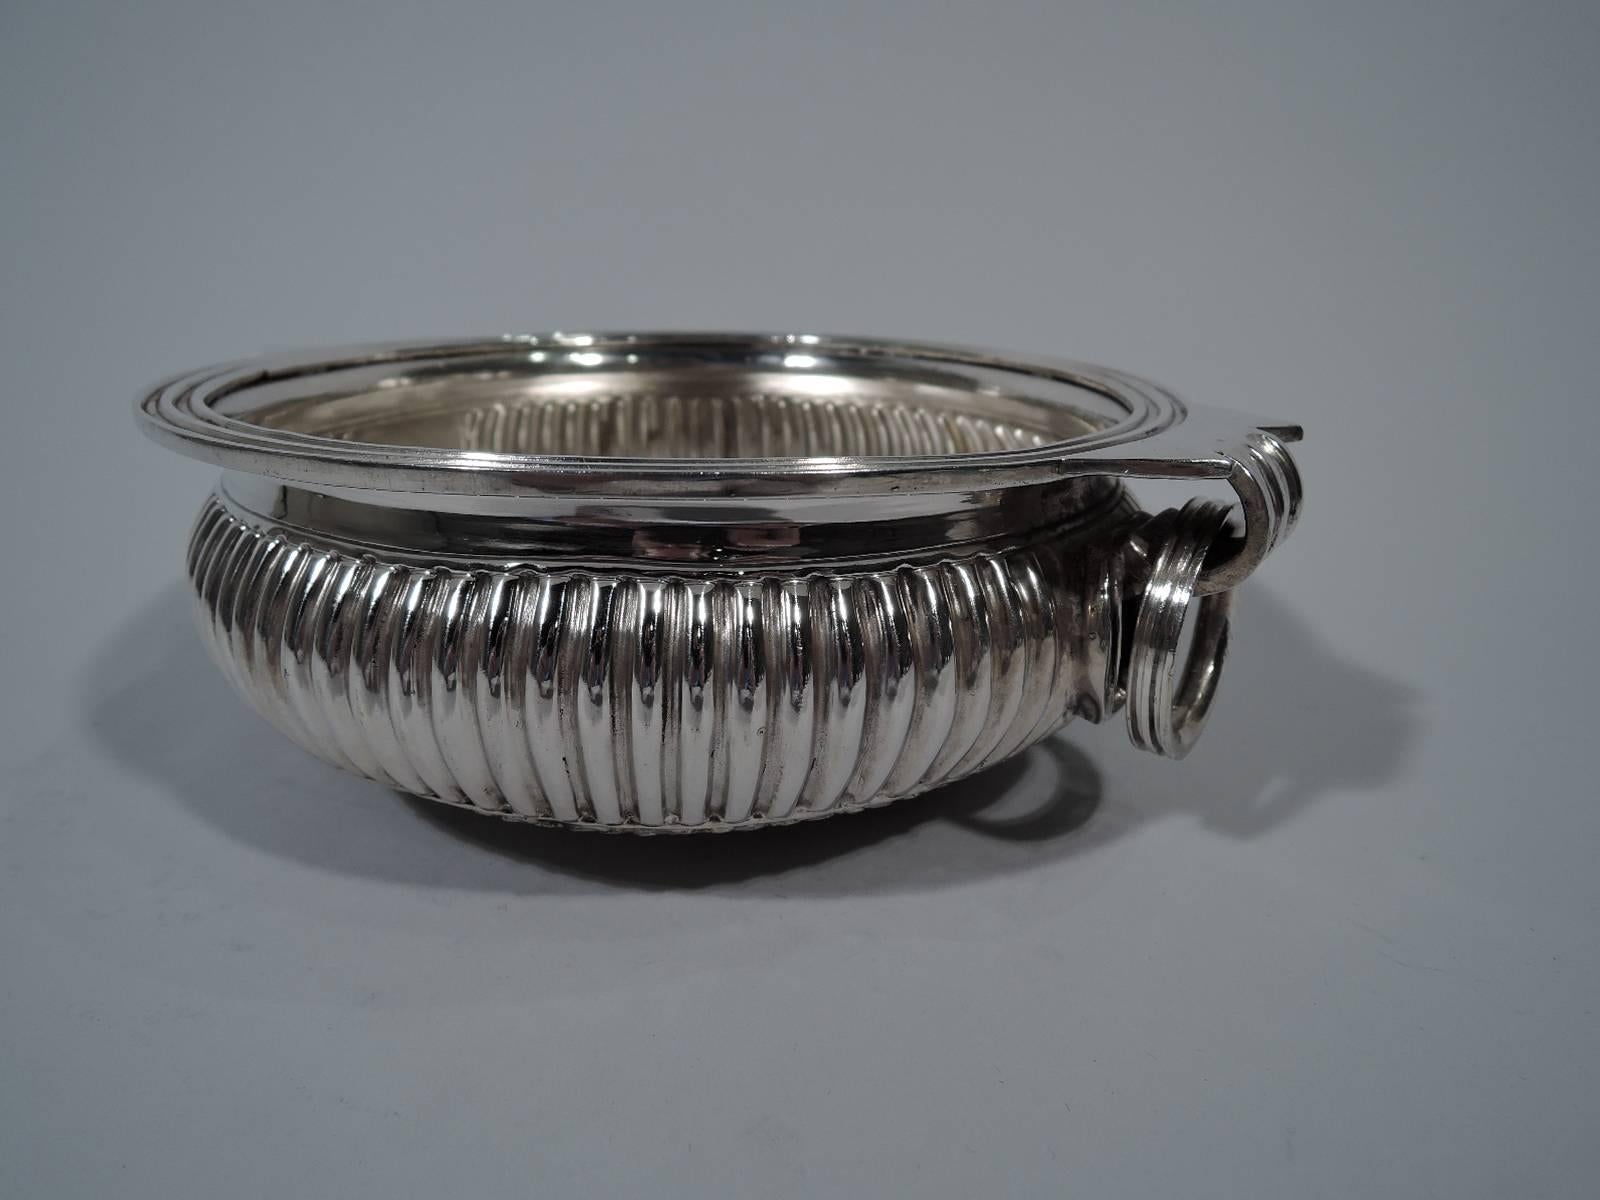 Modern Traditional Indian Sterling Silver Bowl with Jangly Rings